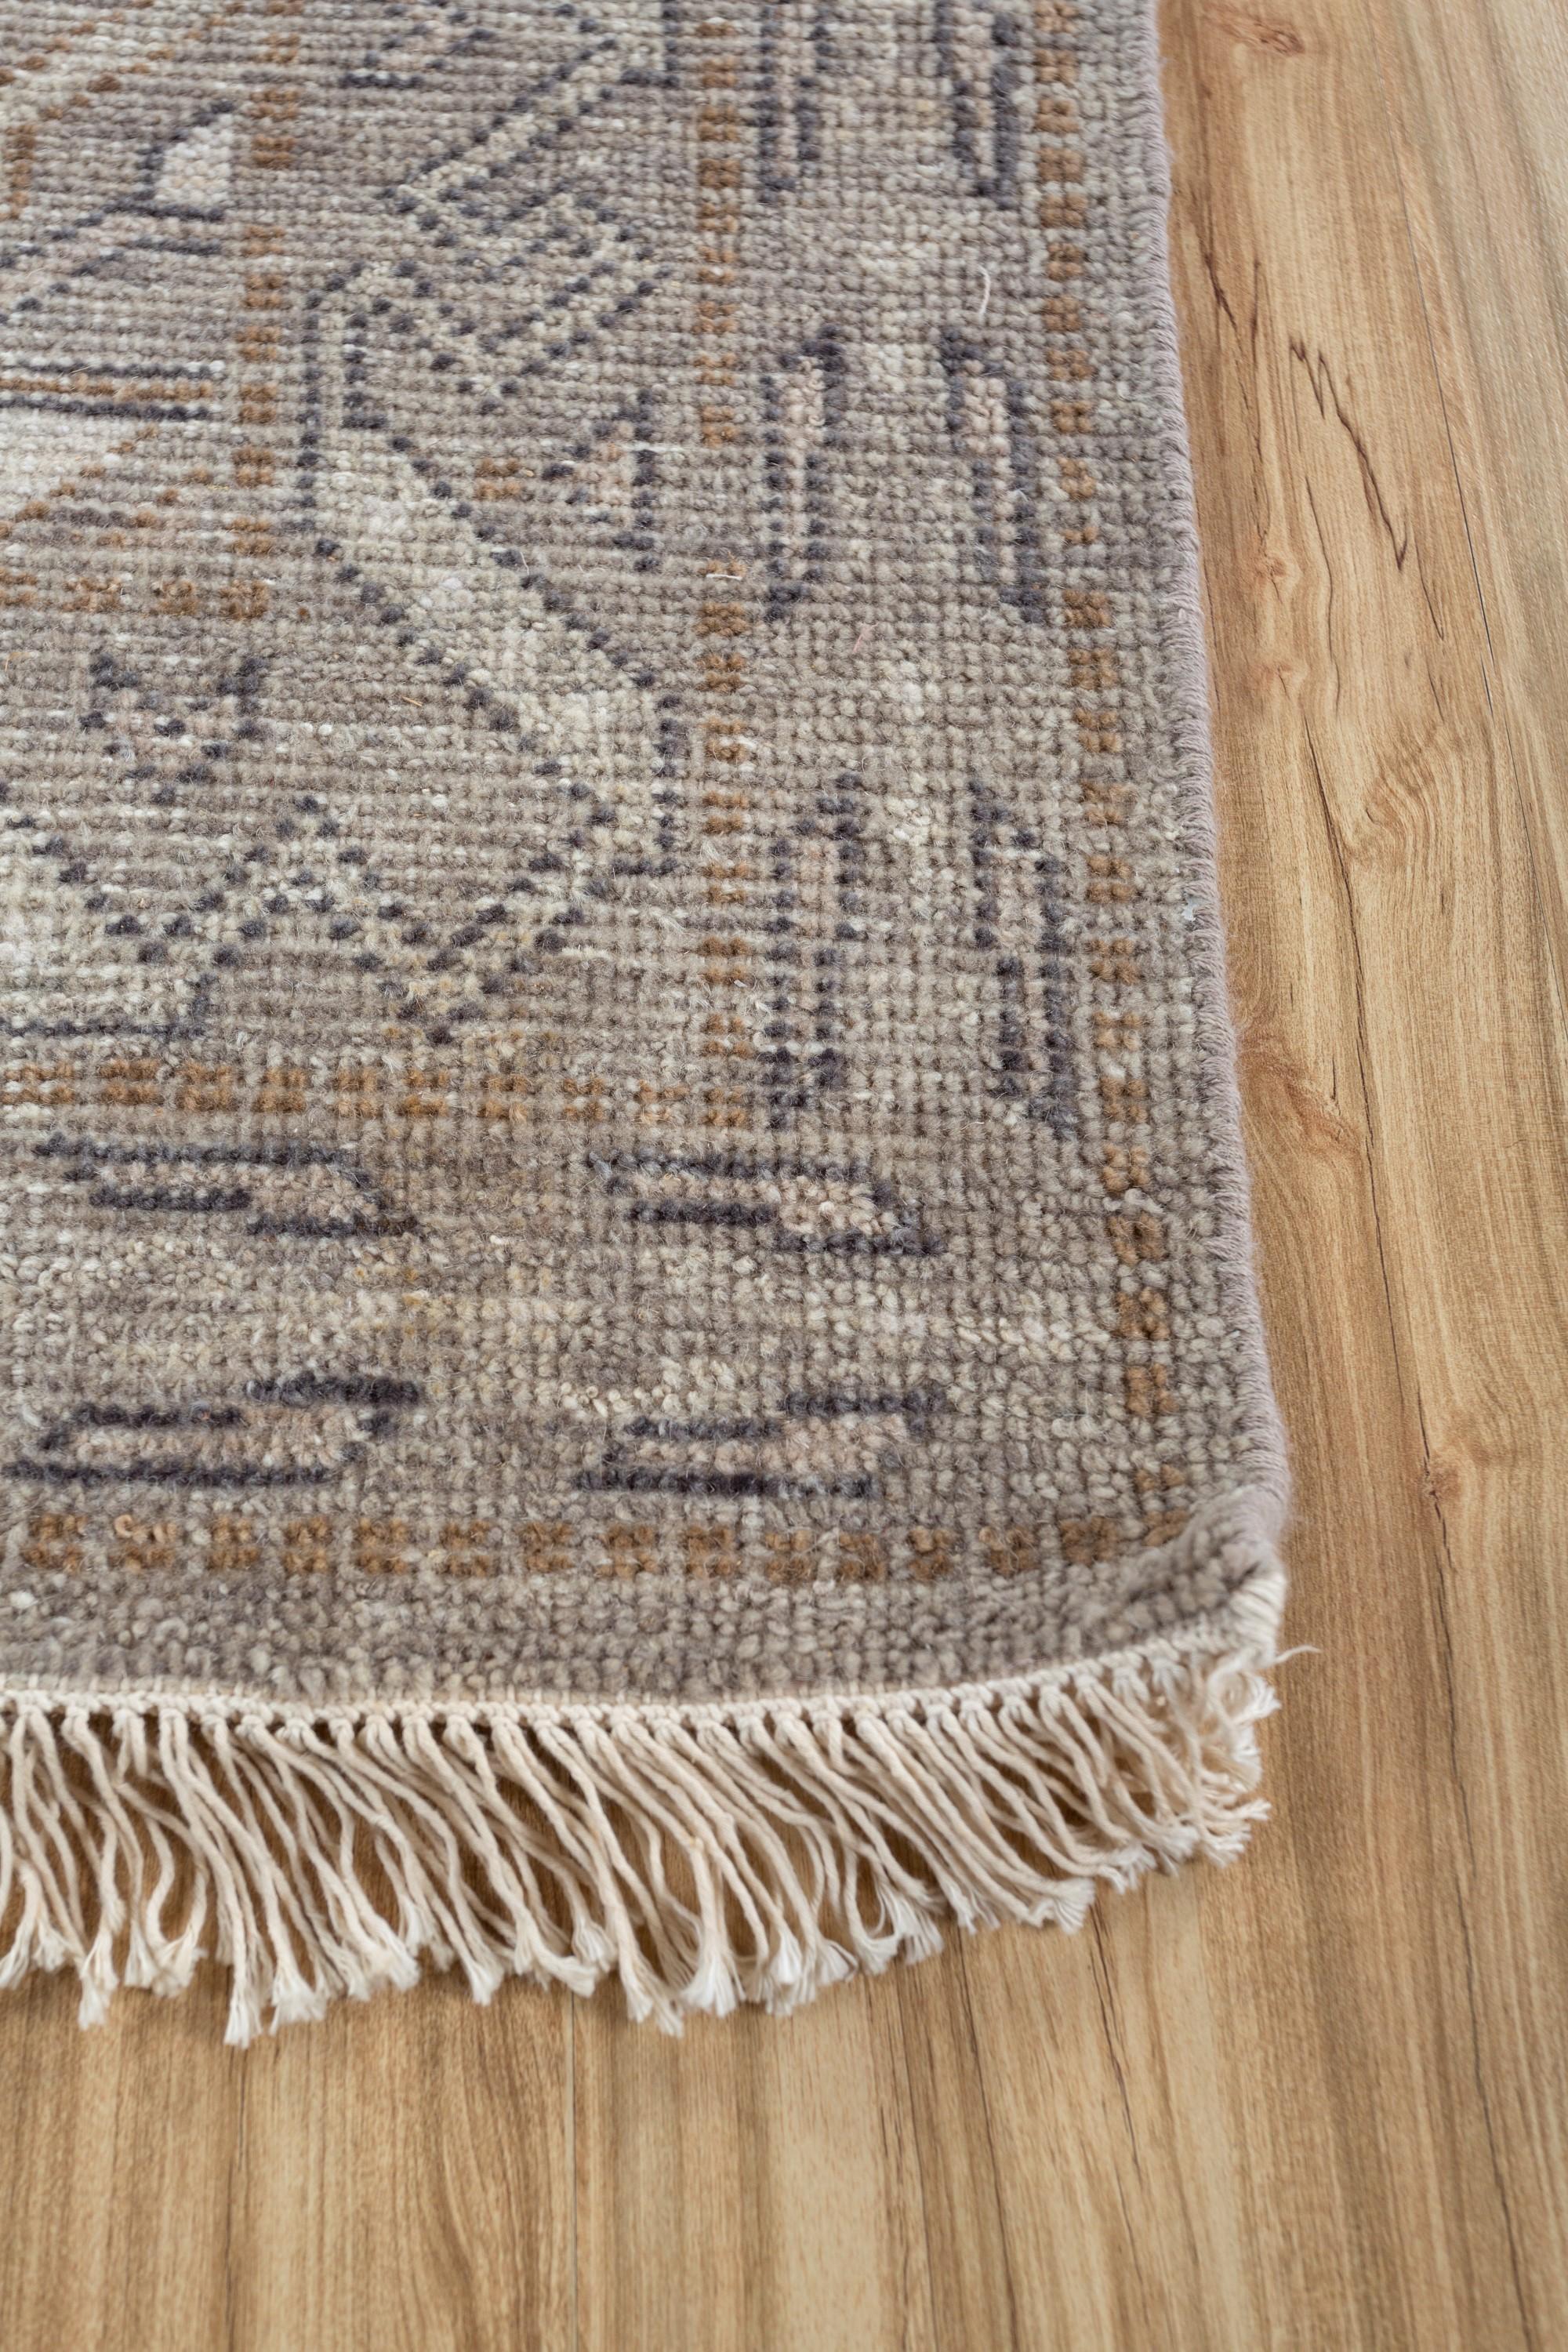 Introducing this luxury rug from our Savana collection which is a subtle masterpiece that redefines the essence of timeless design. It exhibits a simple yet versatile pattern that becomes the backbone of beauty and unparalleled comfort in any room.